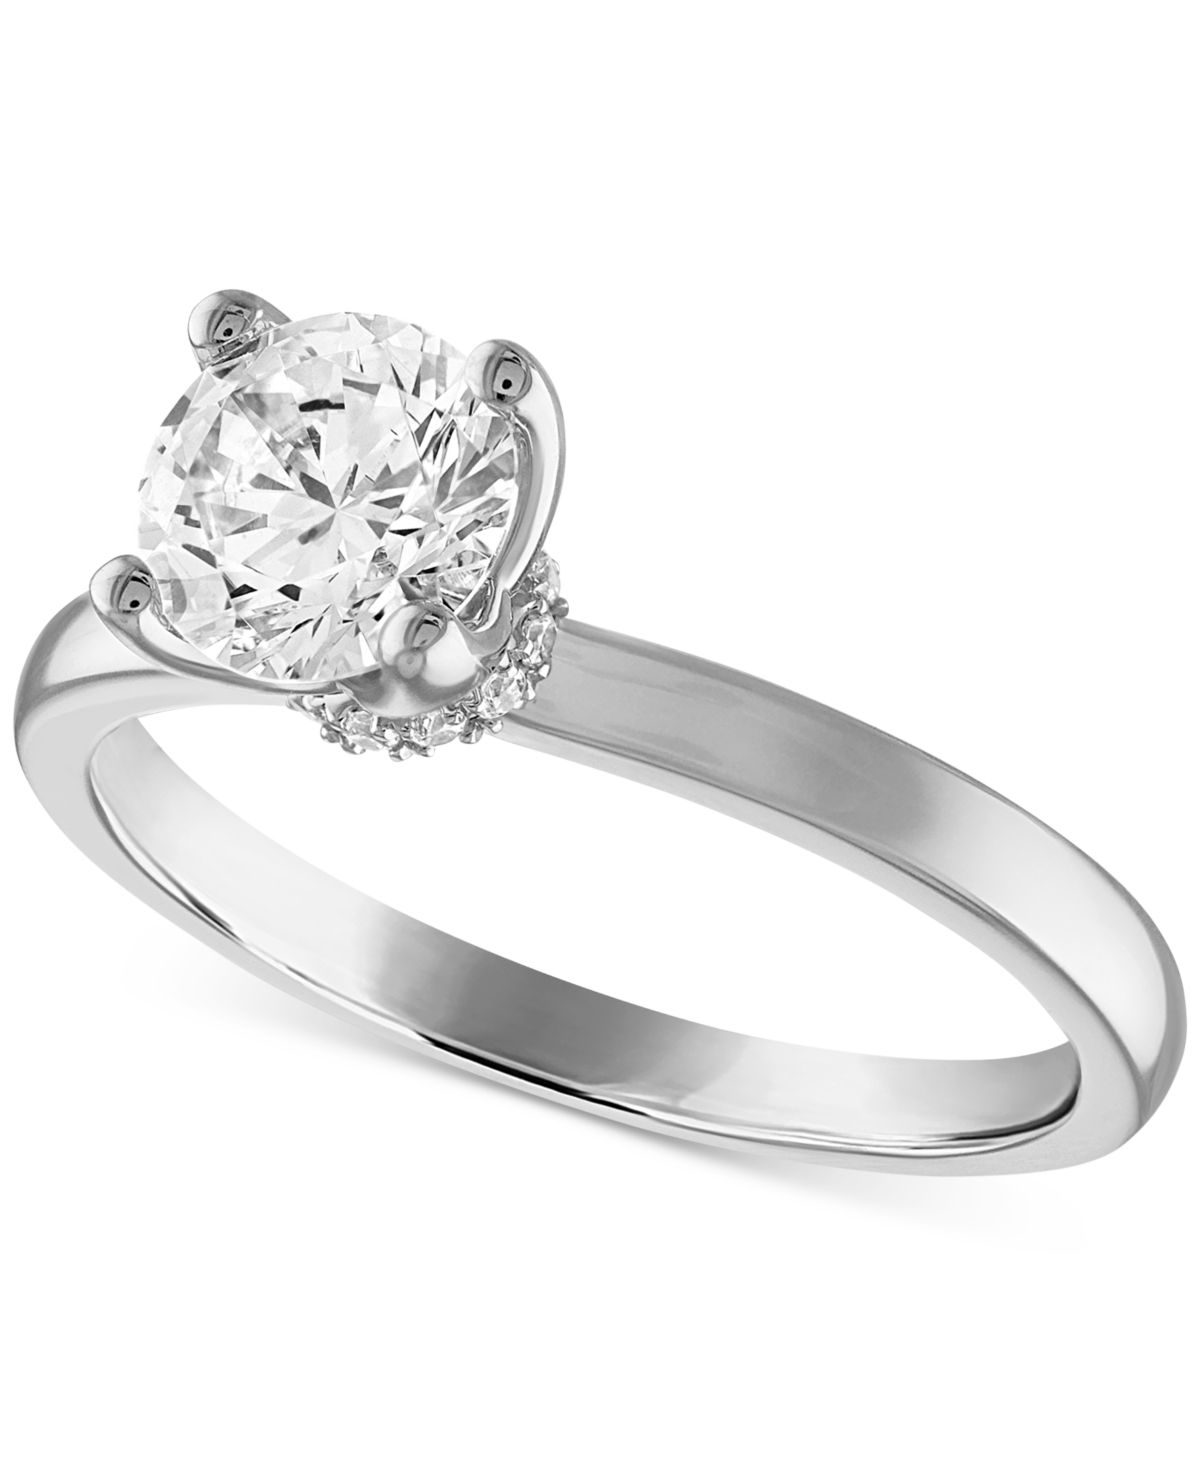 Certified Diamond Solitaire Engagement Ring (1 ct. t.w.) in 14k White Gold featuring diamonds with the De Beers Code of Origin, Created for Ma